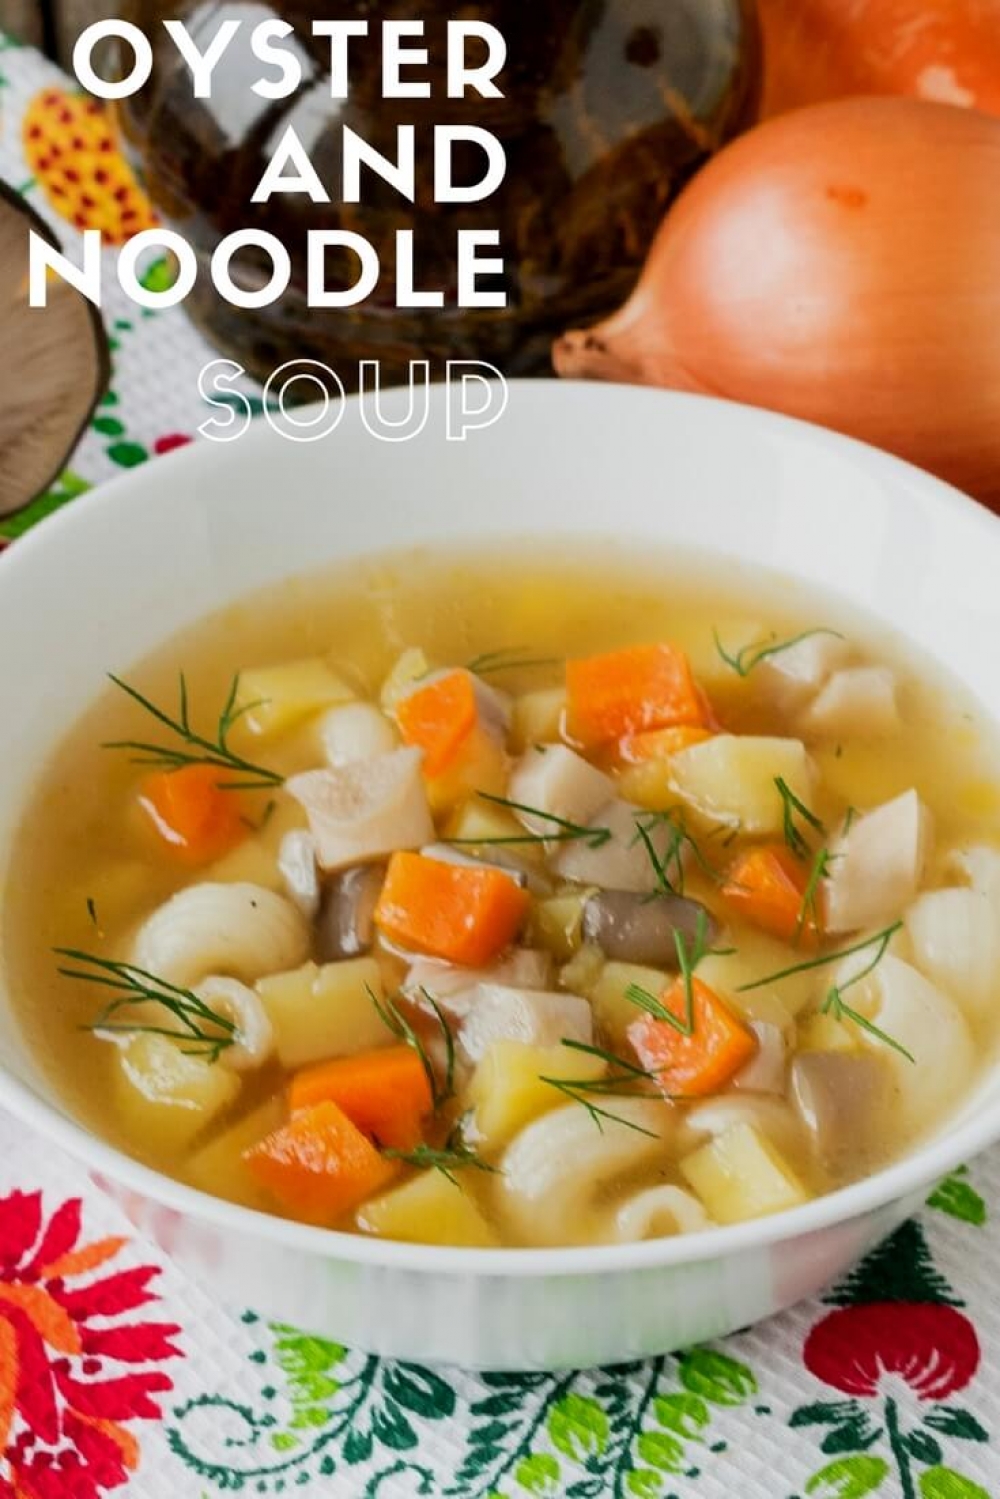 Oyster and noodle soup